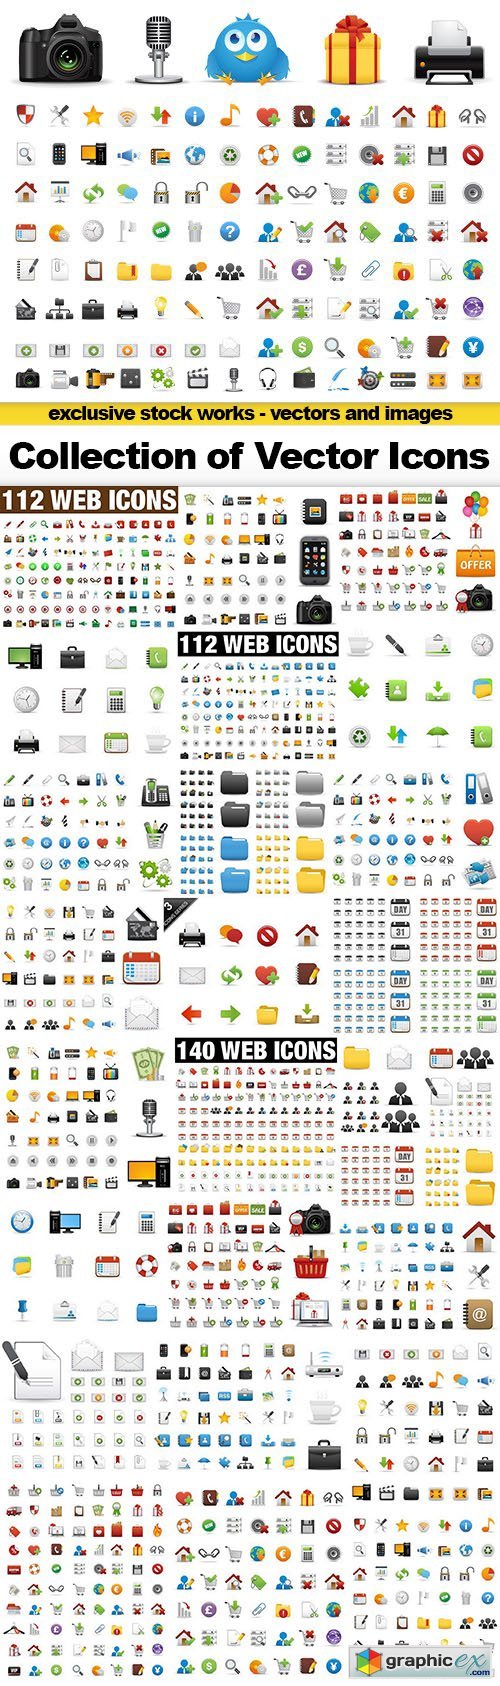 Big Collection of Vector Icons - 25xEPS, AI